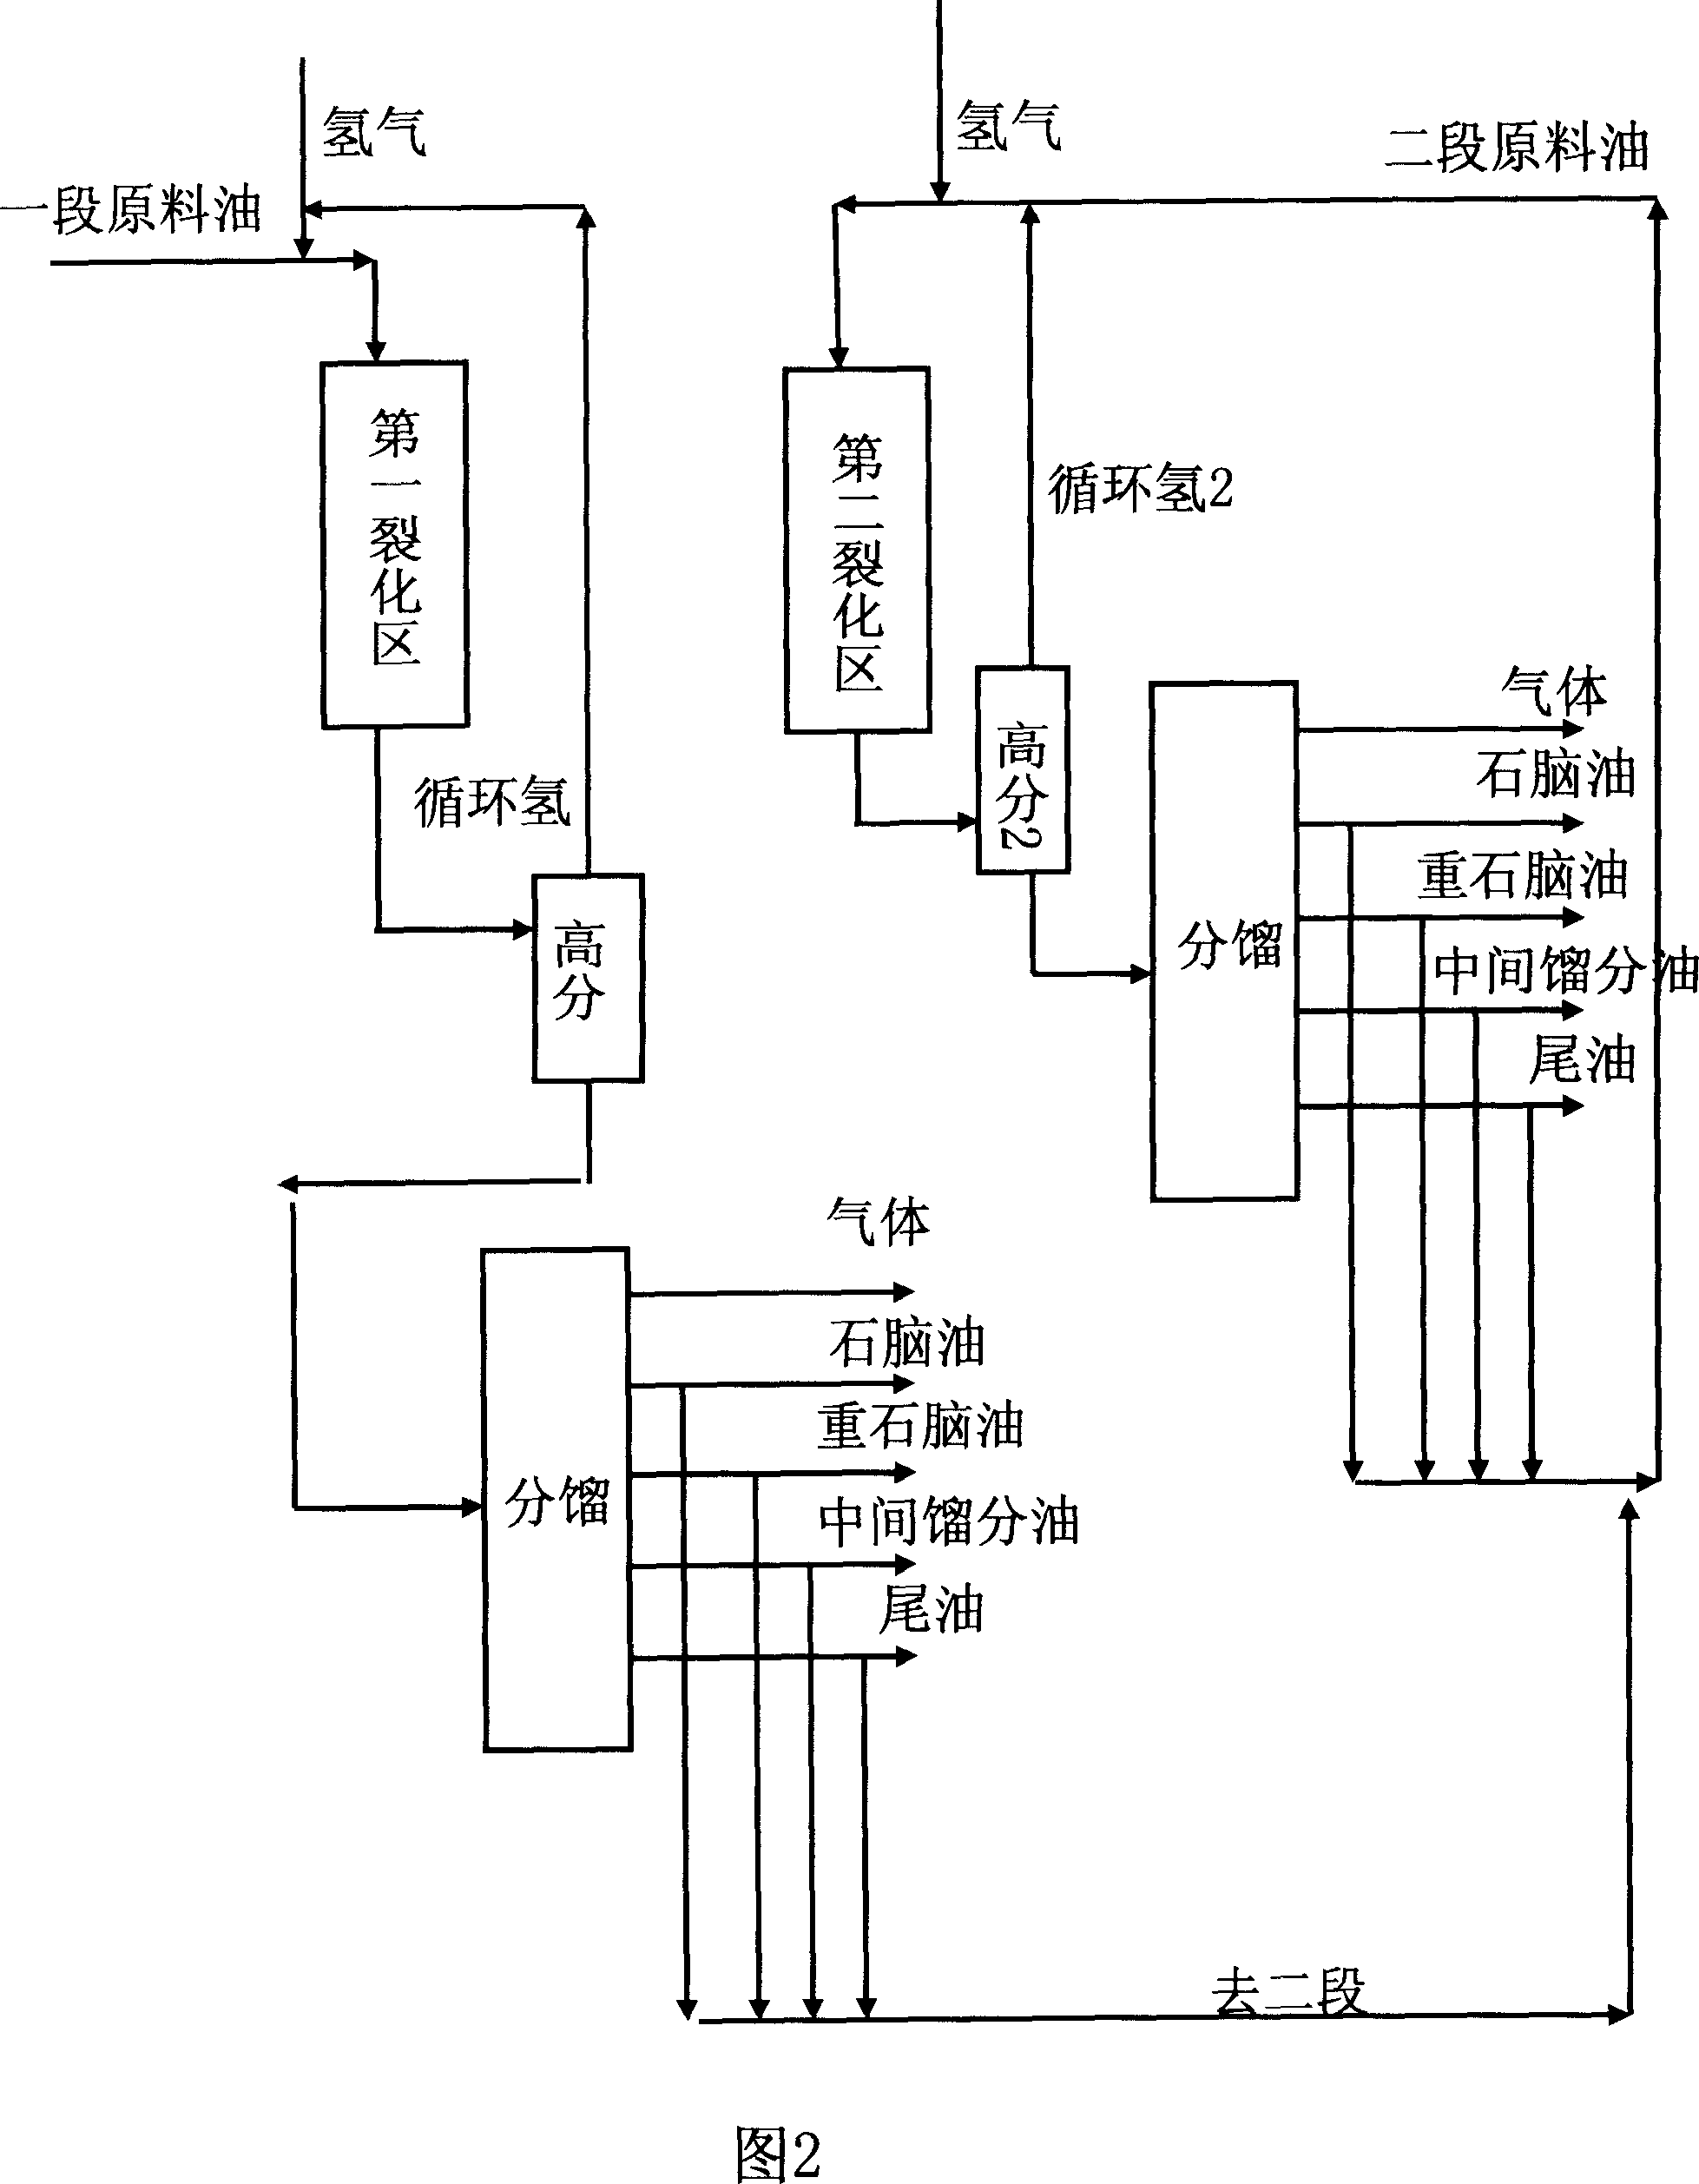 Two-stage hydrocracking process